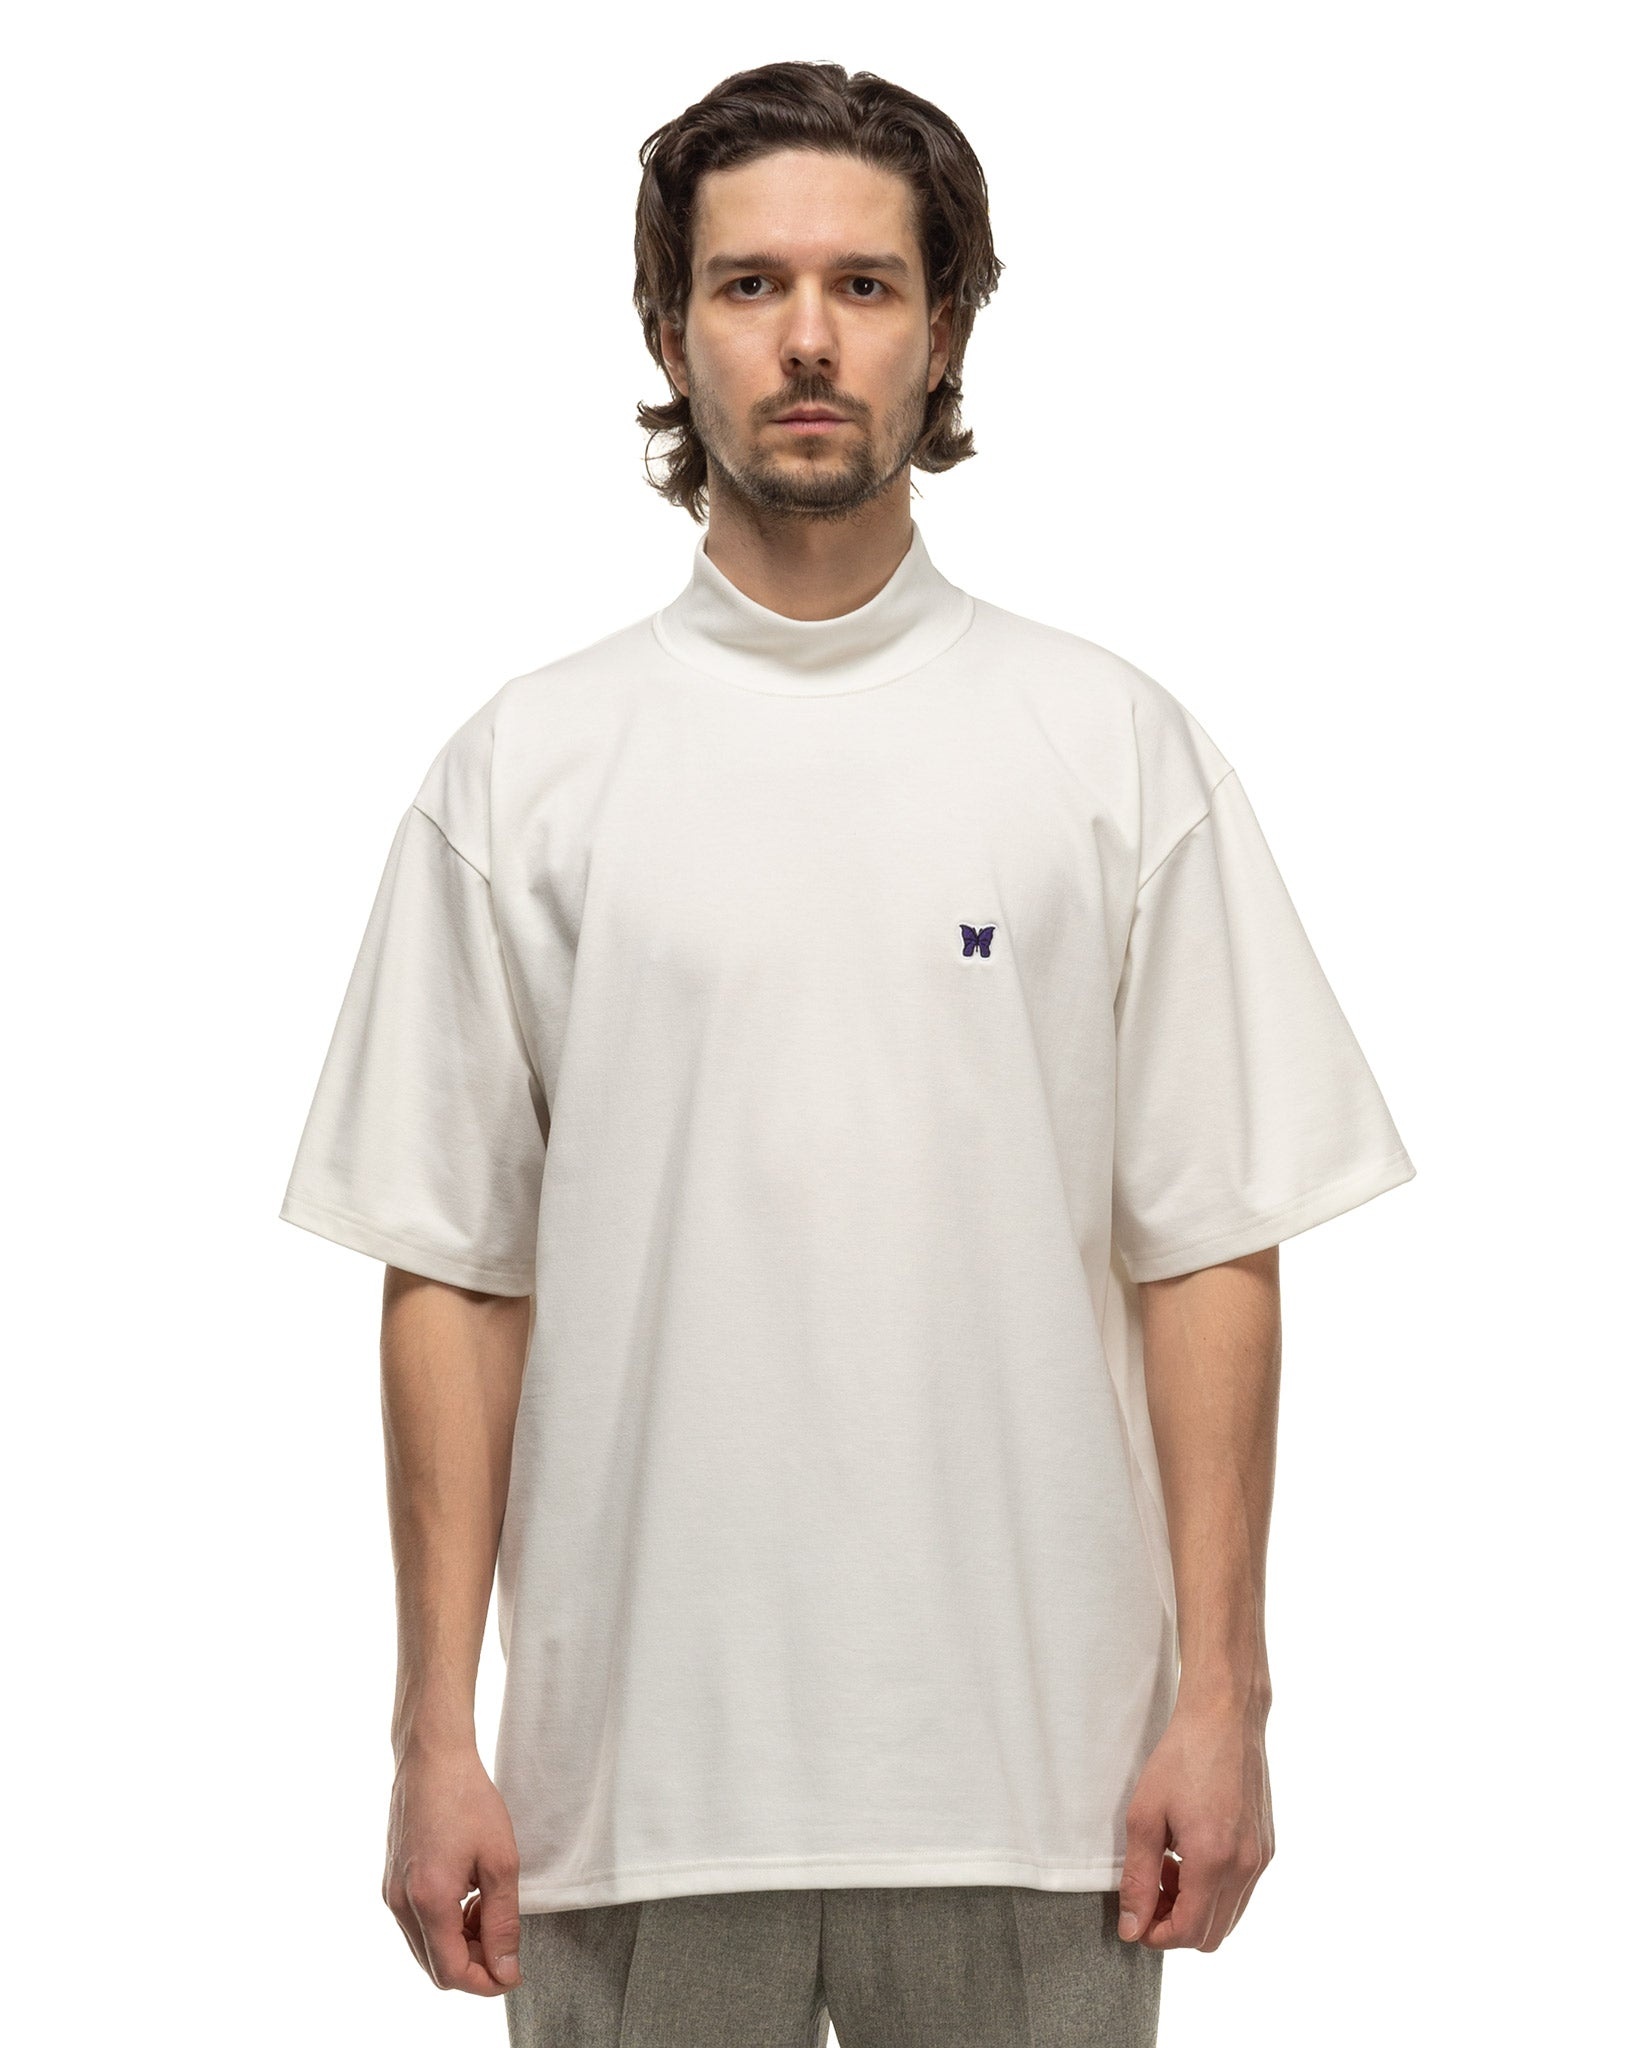 S/S Mock Neck Tee - Poly Jersey White - 4